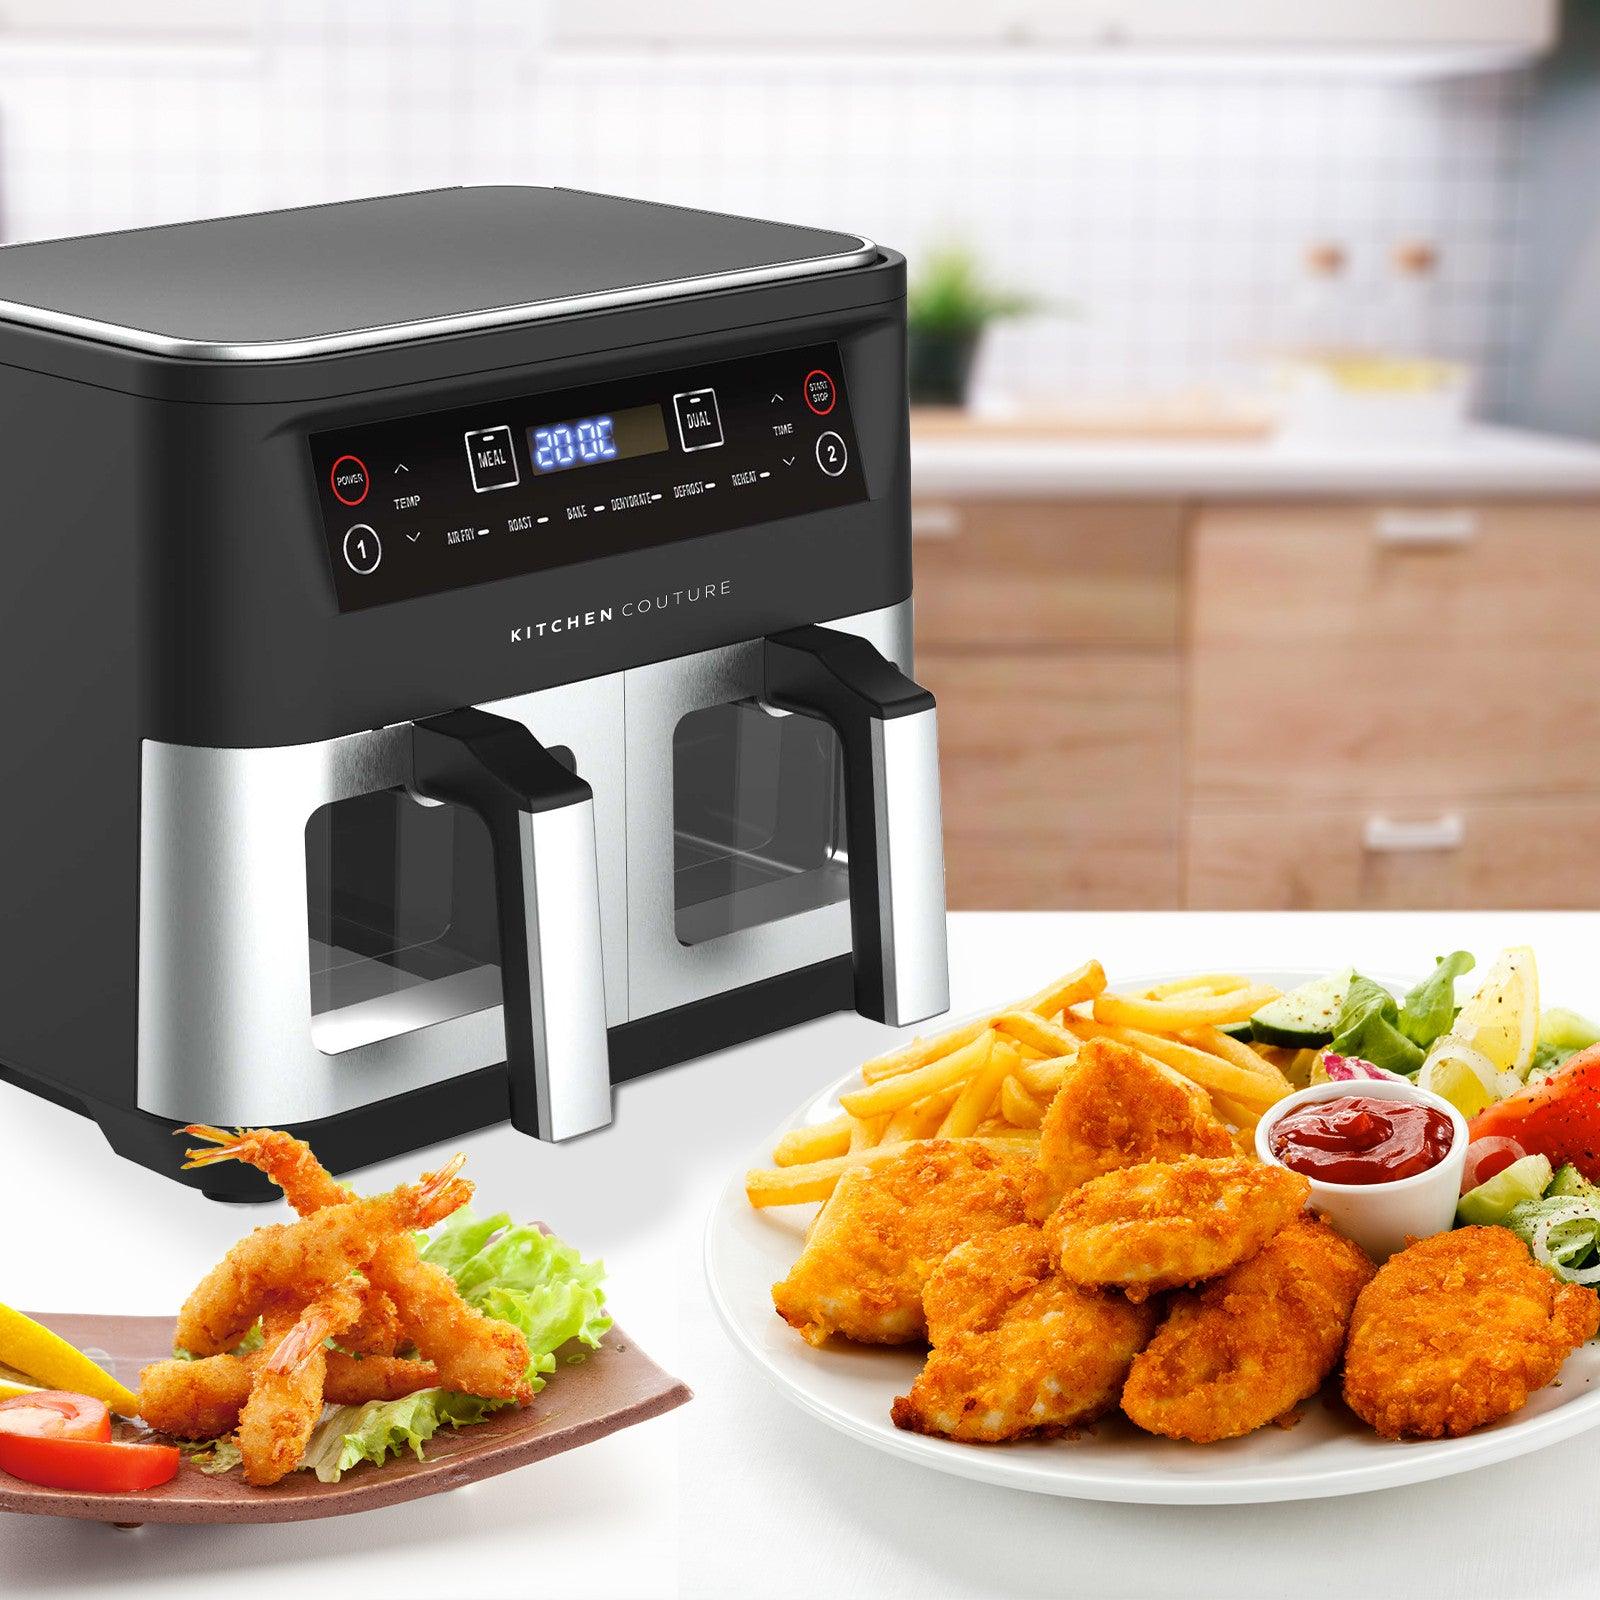 Kitchen Couture Dual View 2 x 5 Litre (10 Litre) Air Fryer Stainless Steel